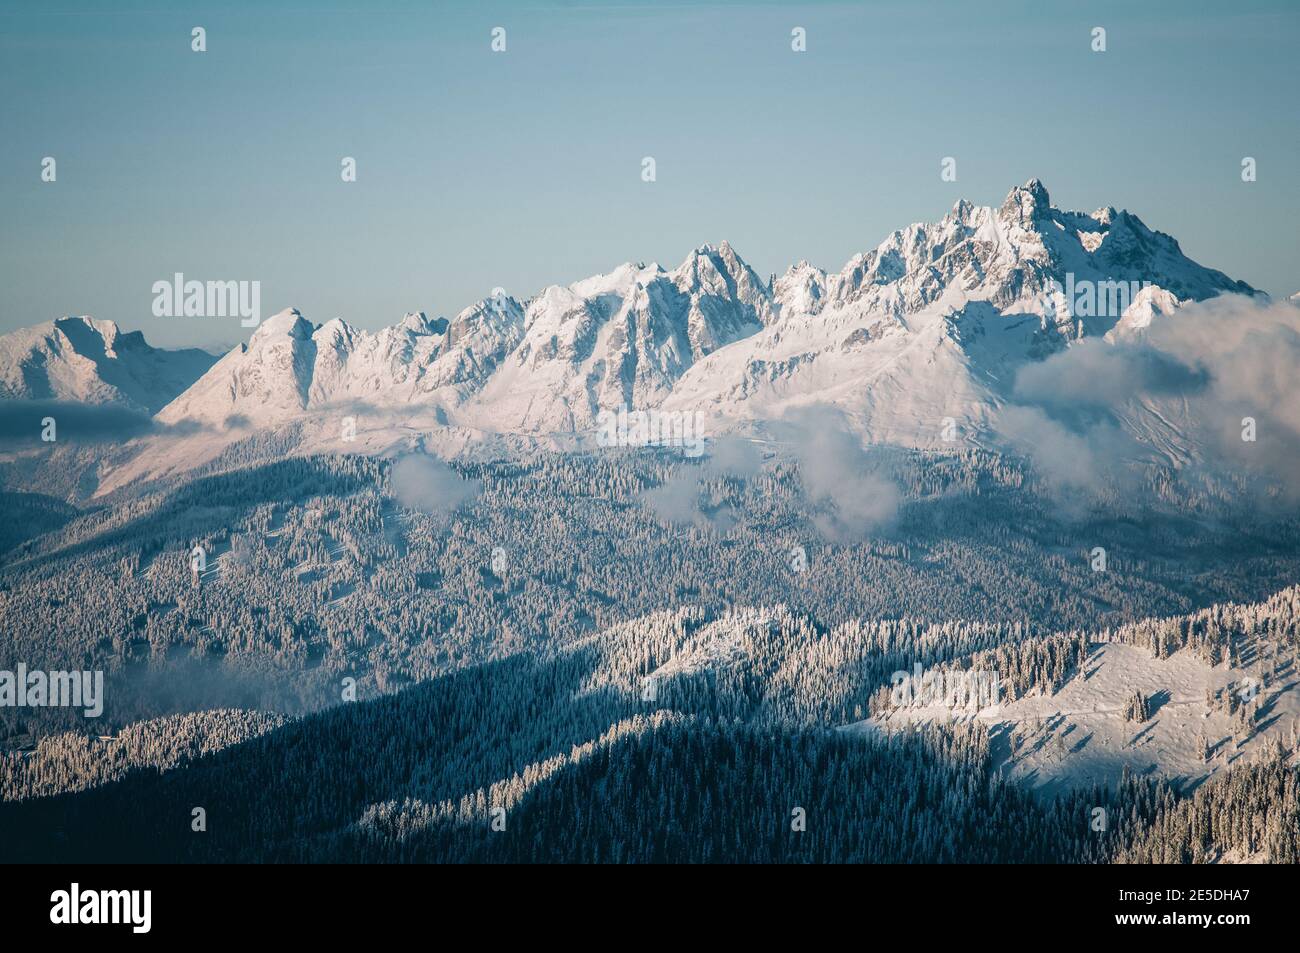 Snow covered forest and mountain landscape, Salzburg, Austria Stock Photo